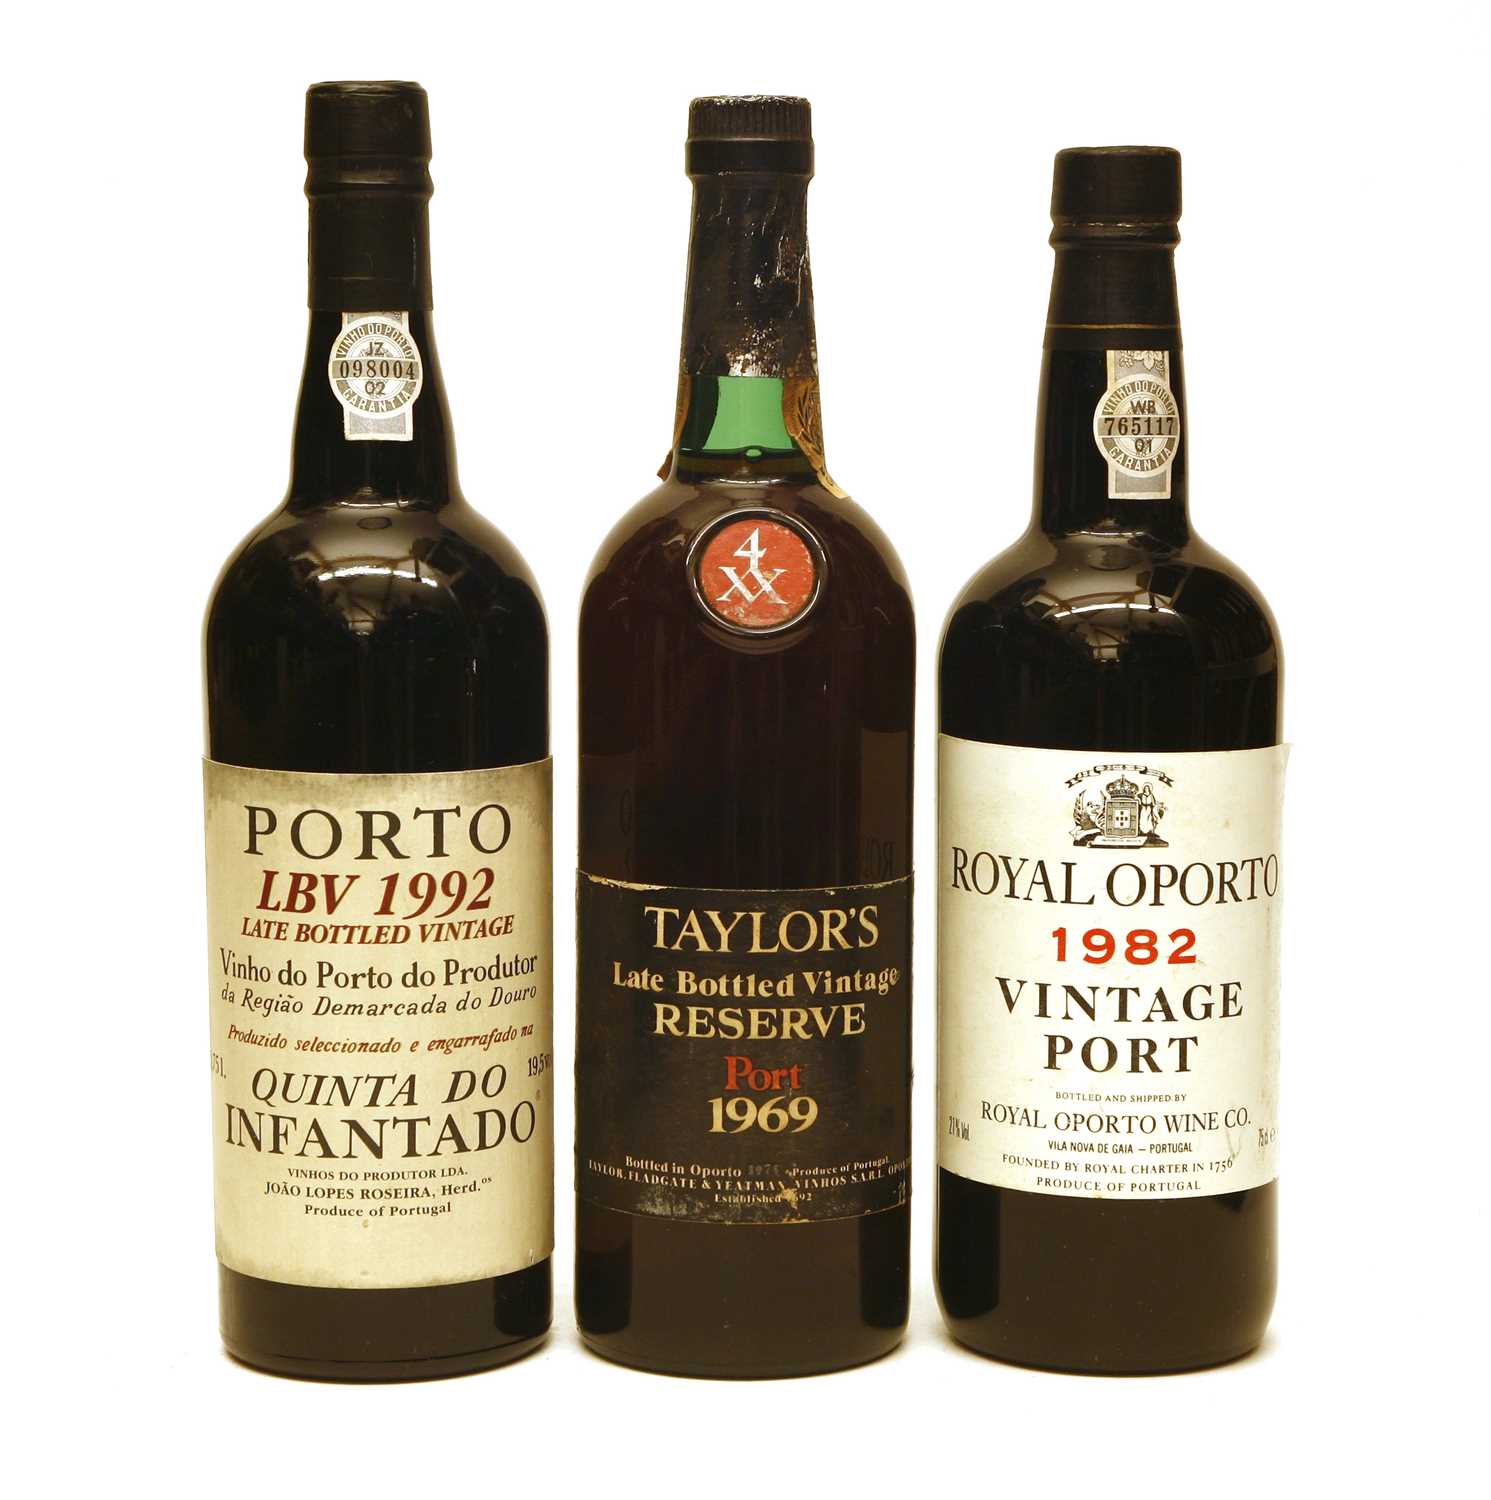 Assorted Port to include: Taylors, 1969, one bottle plus two various other bottles